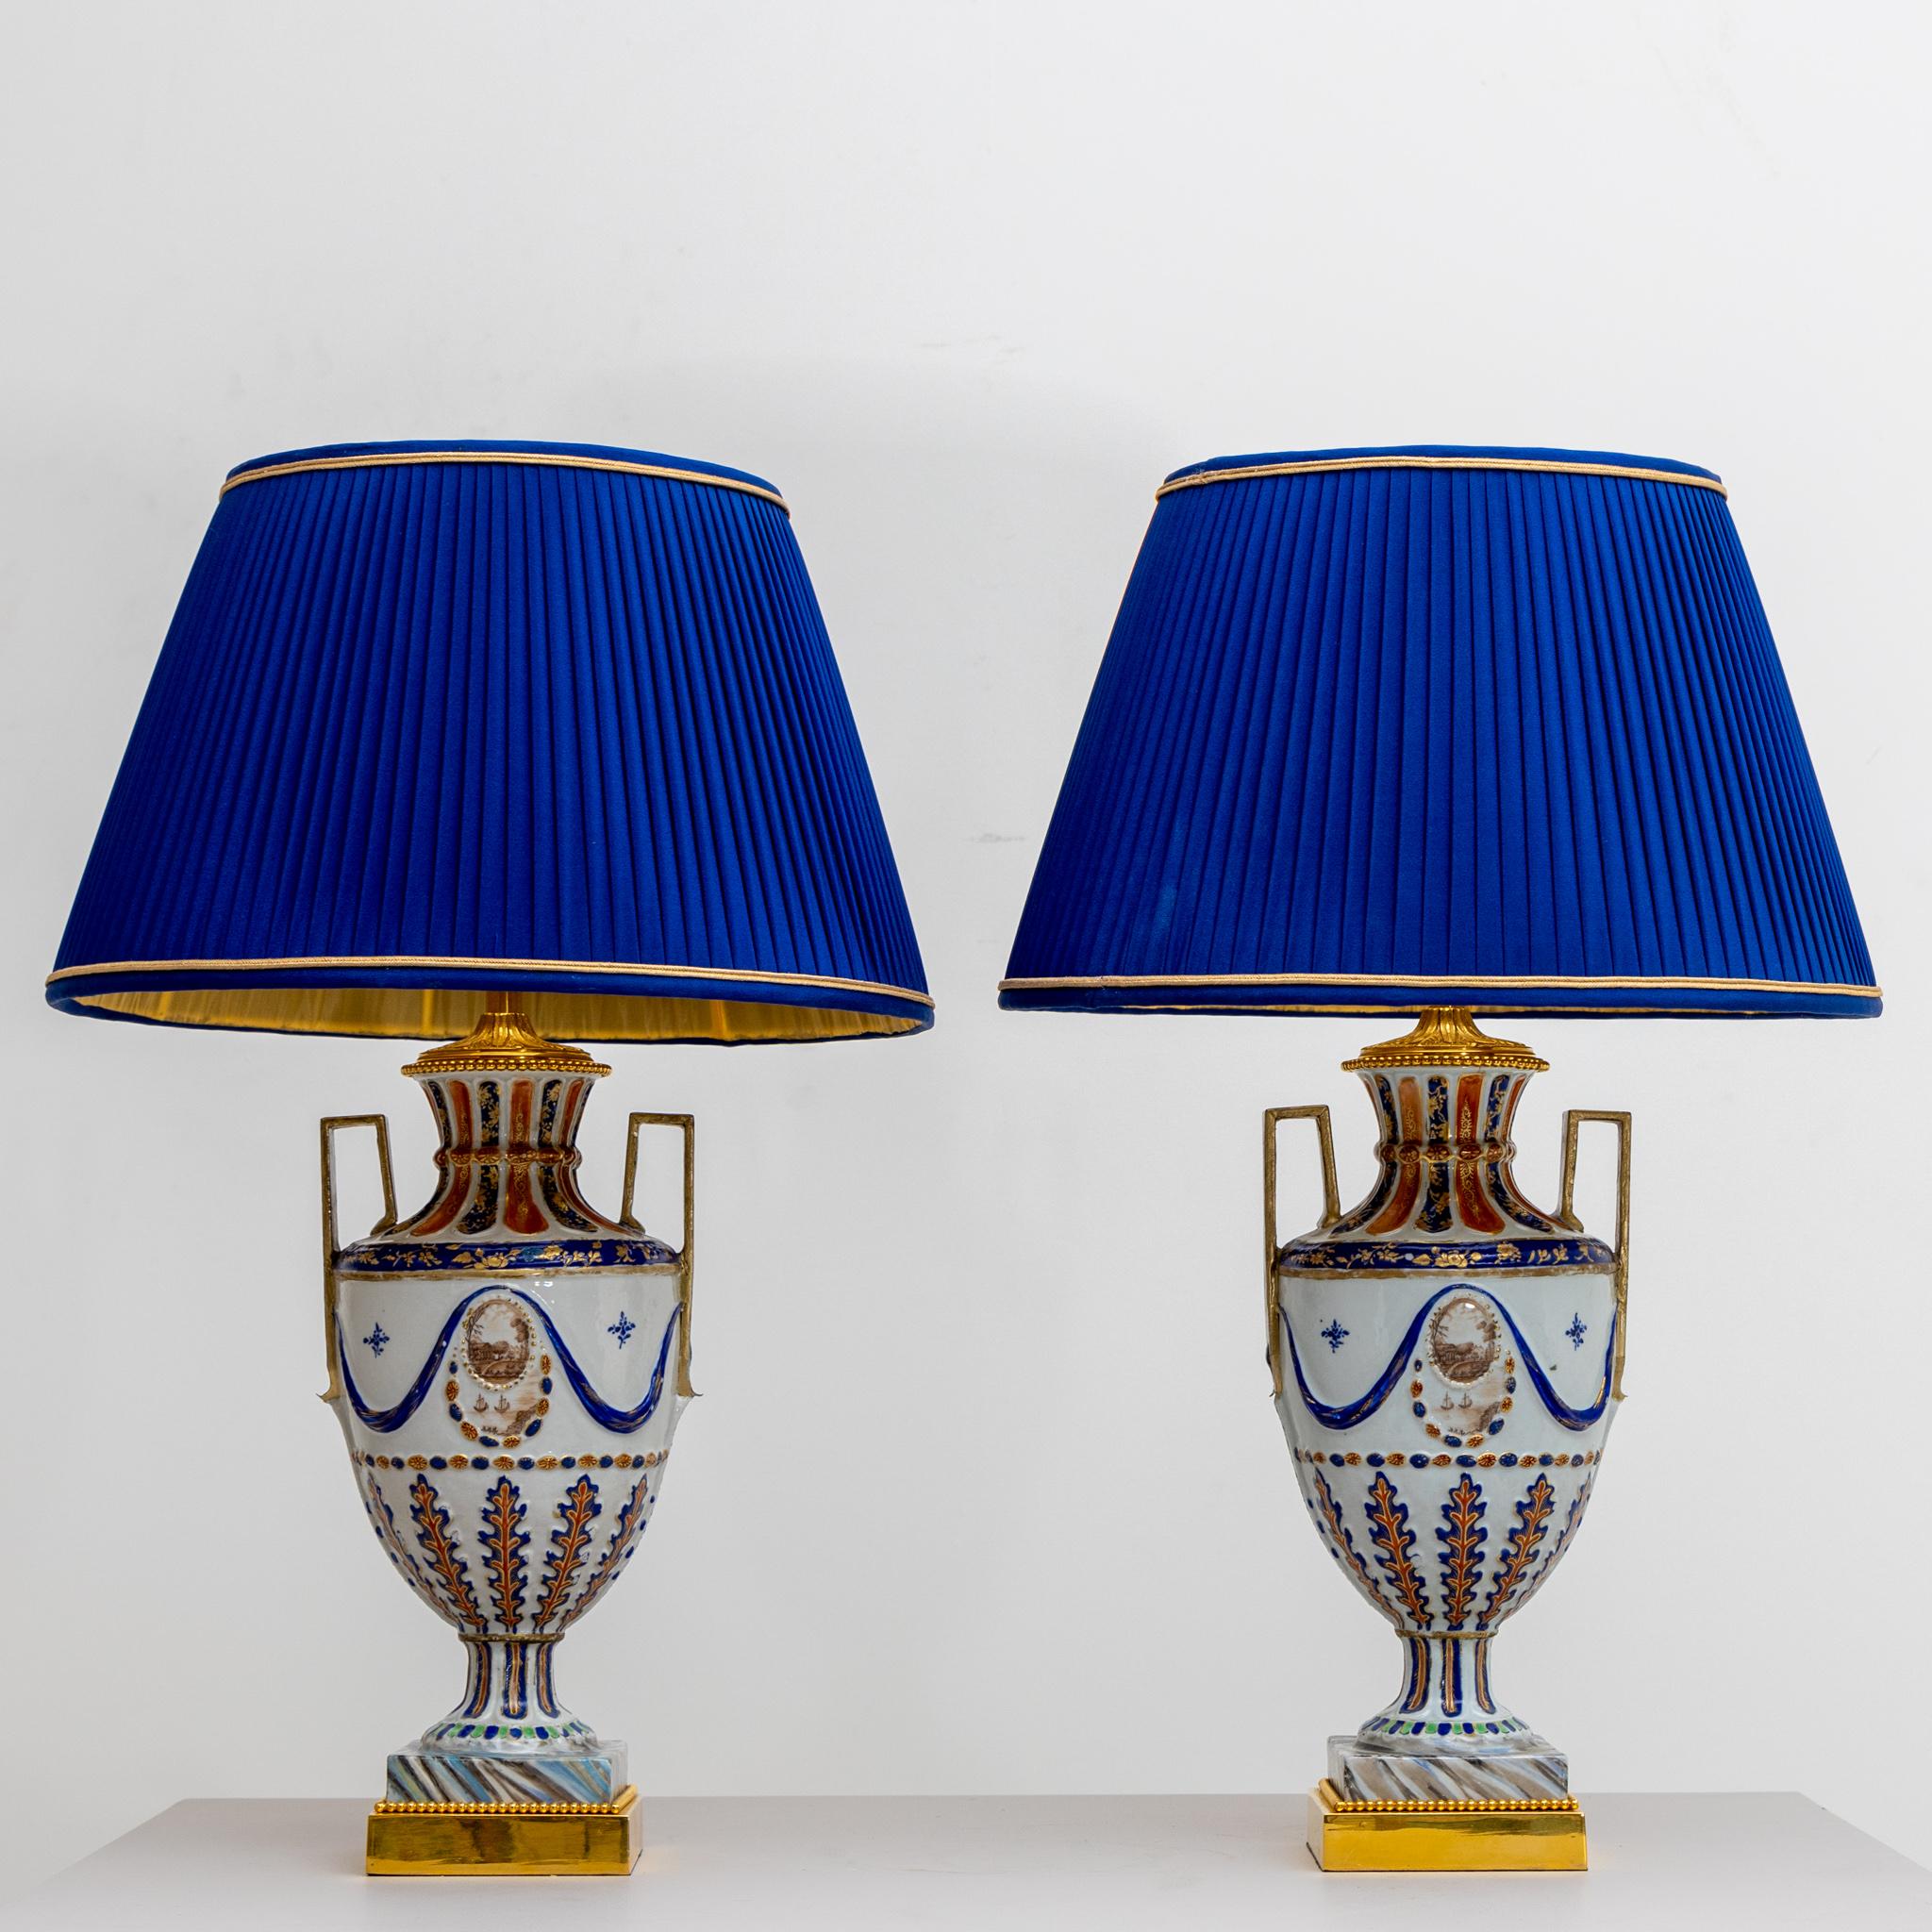 Pair of table lamps with amphora shaped polychrome painted porcelain lamp bases and blue fabric lampshades.